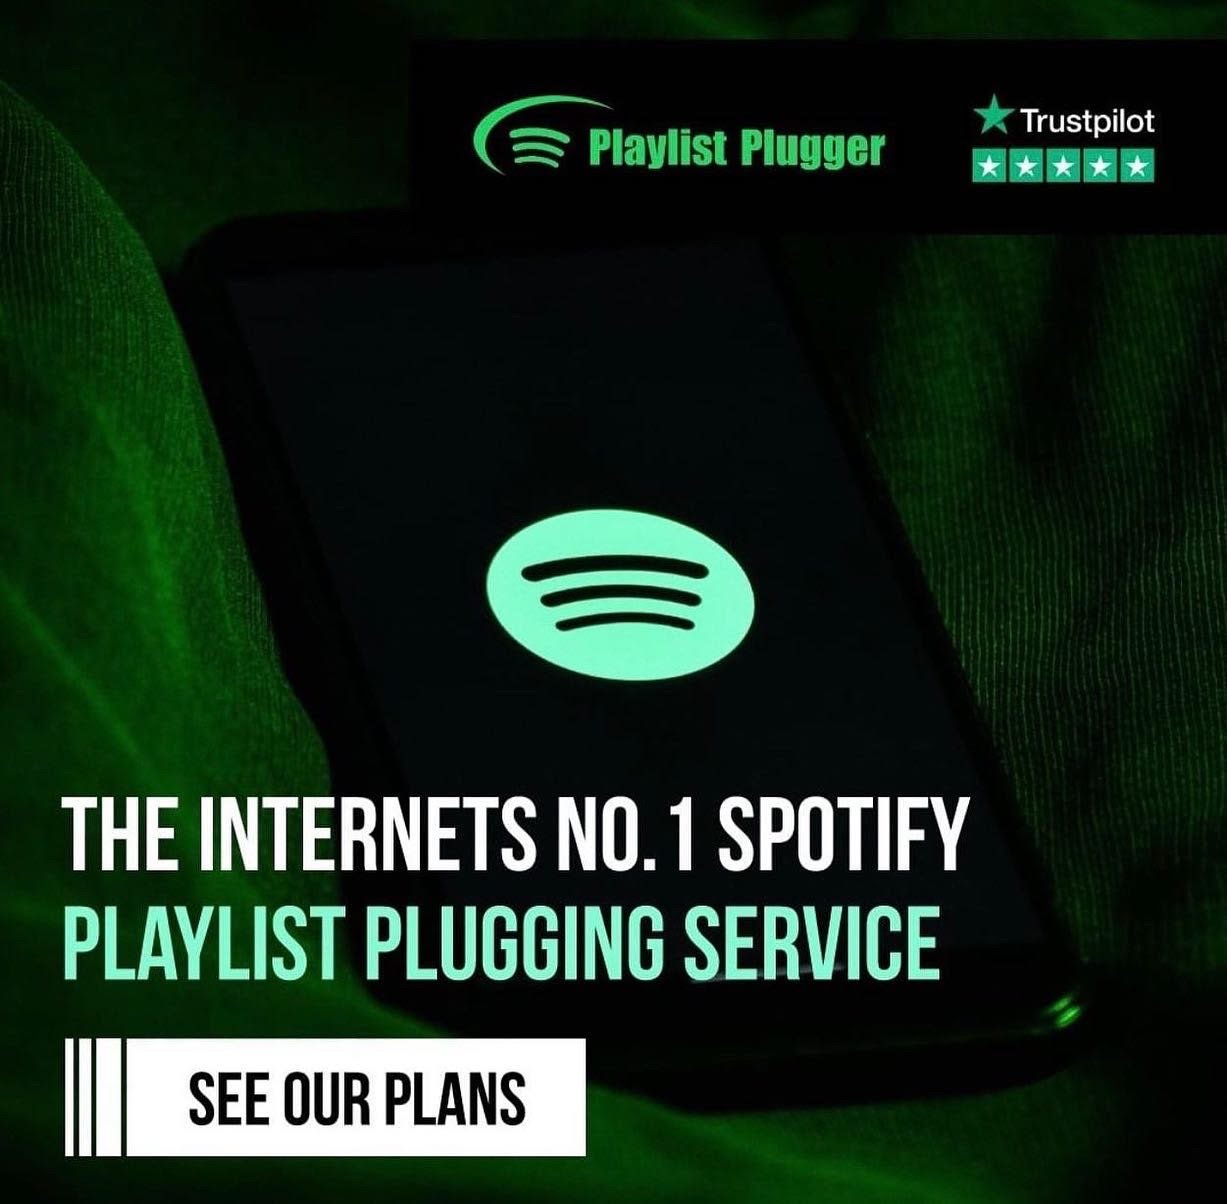 Top Way To Boost Exposure For Musician/Artist: Spotify Playlist Pitching Service